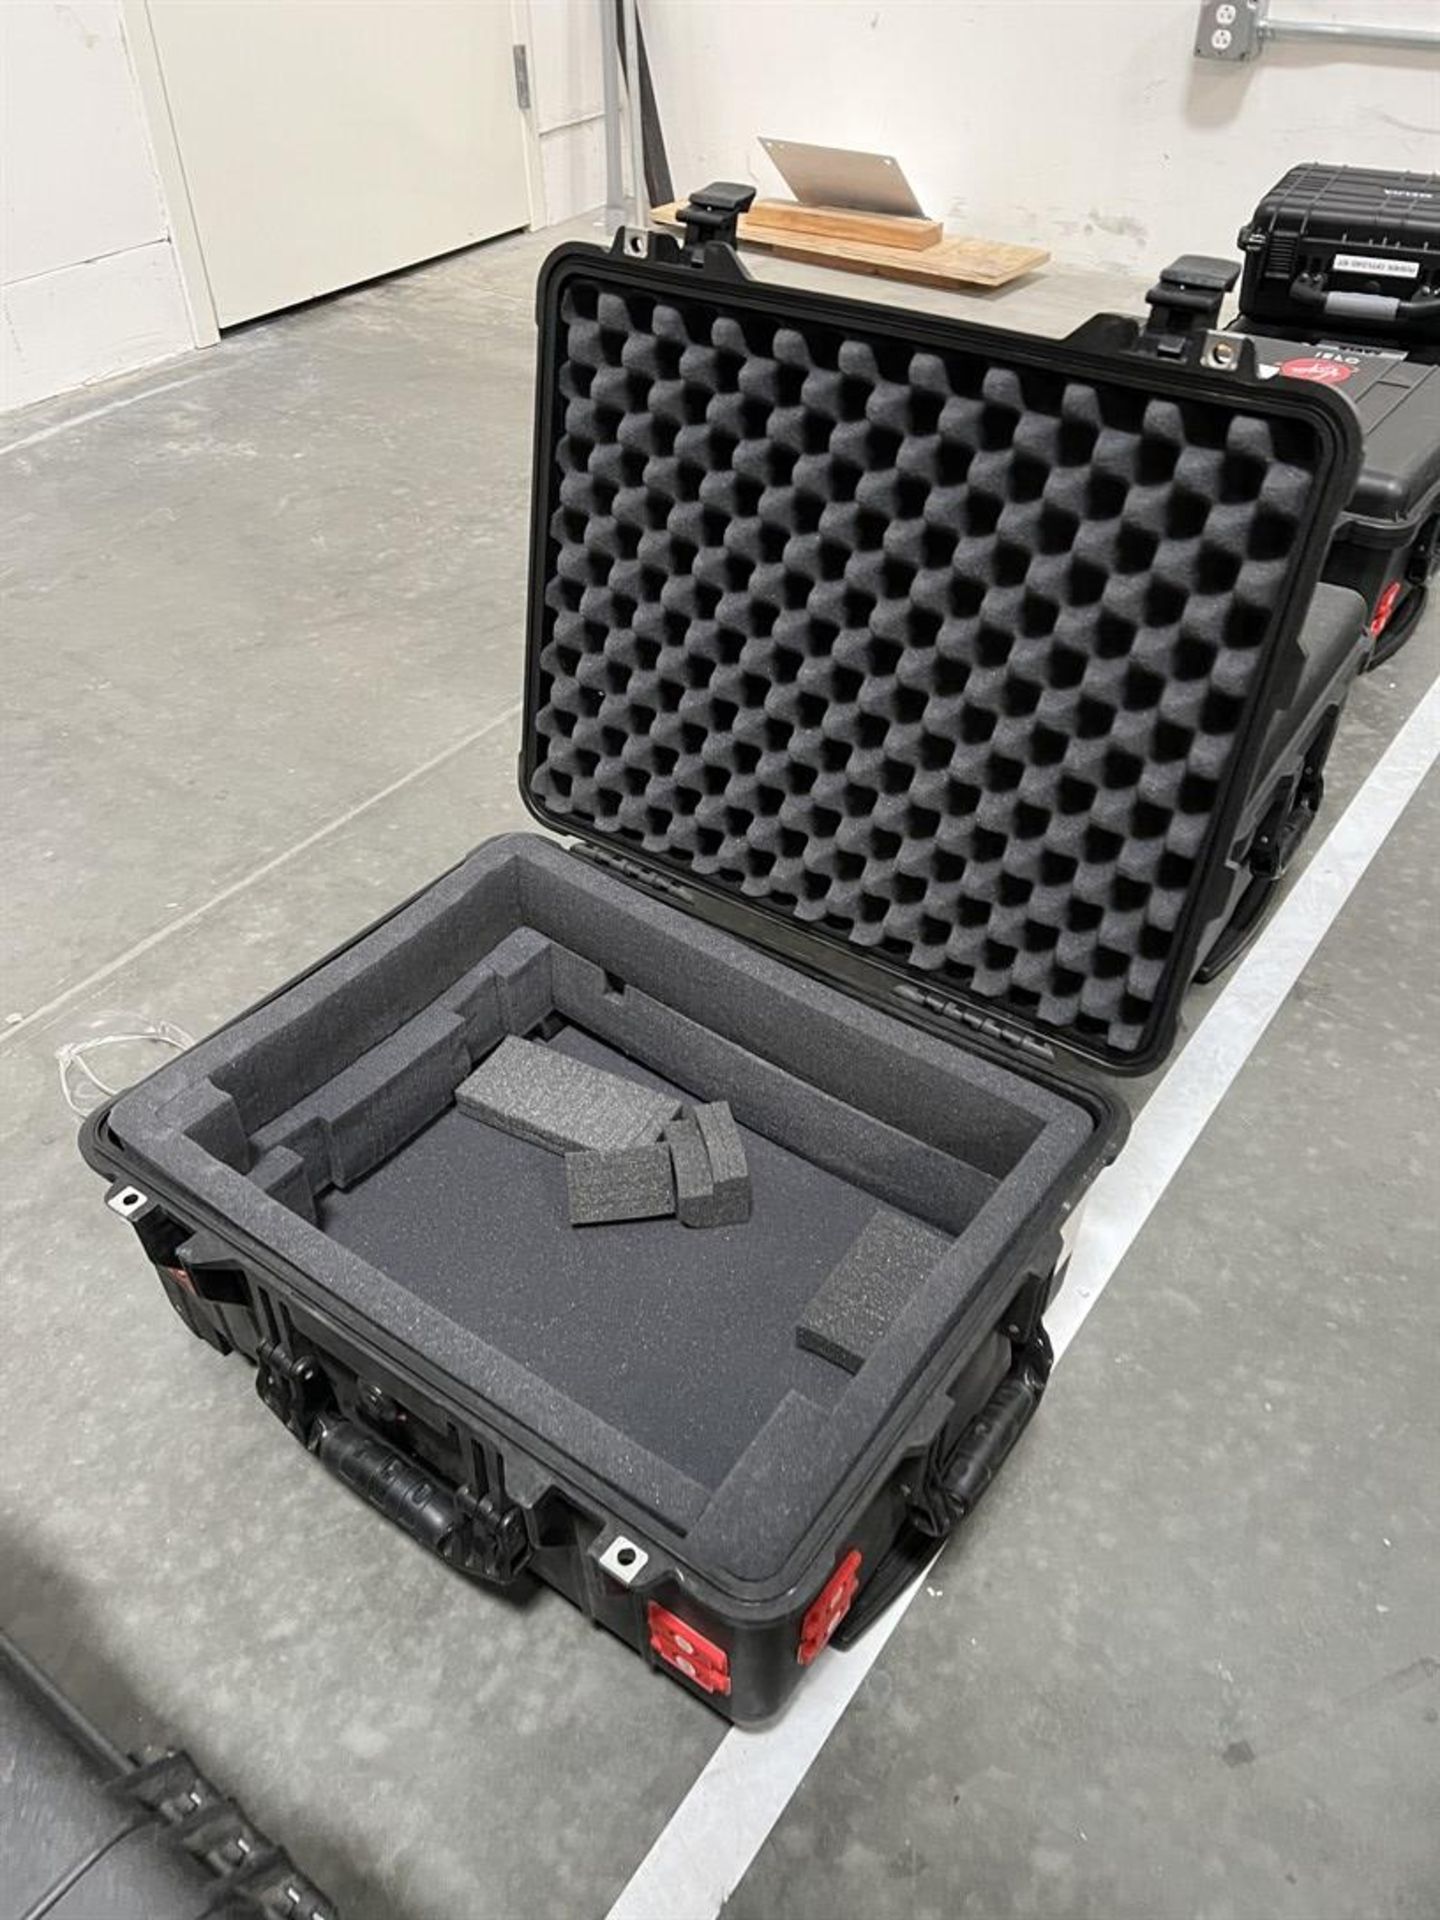 PELICAN 1560 Protective Transport Case - Image 3 of 3